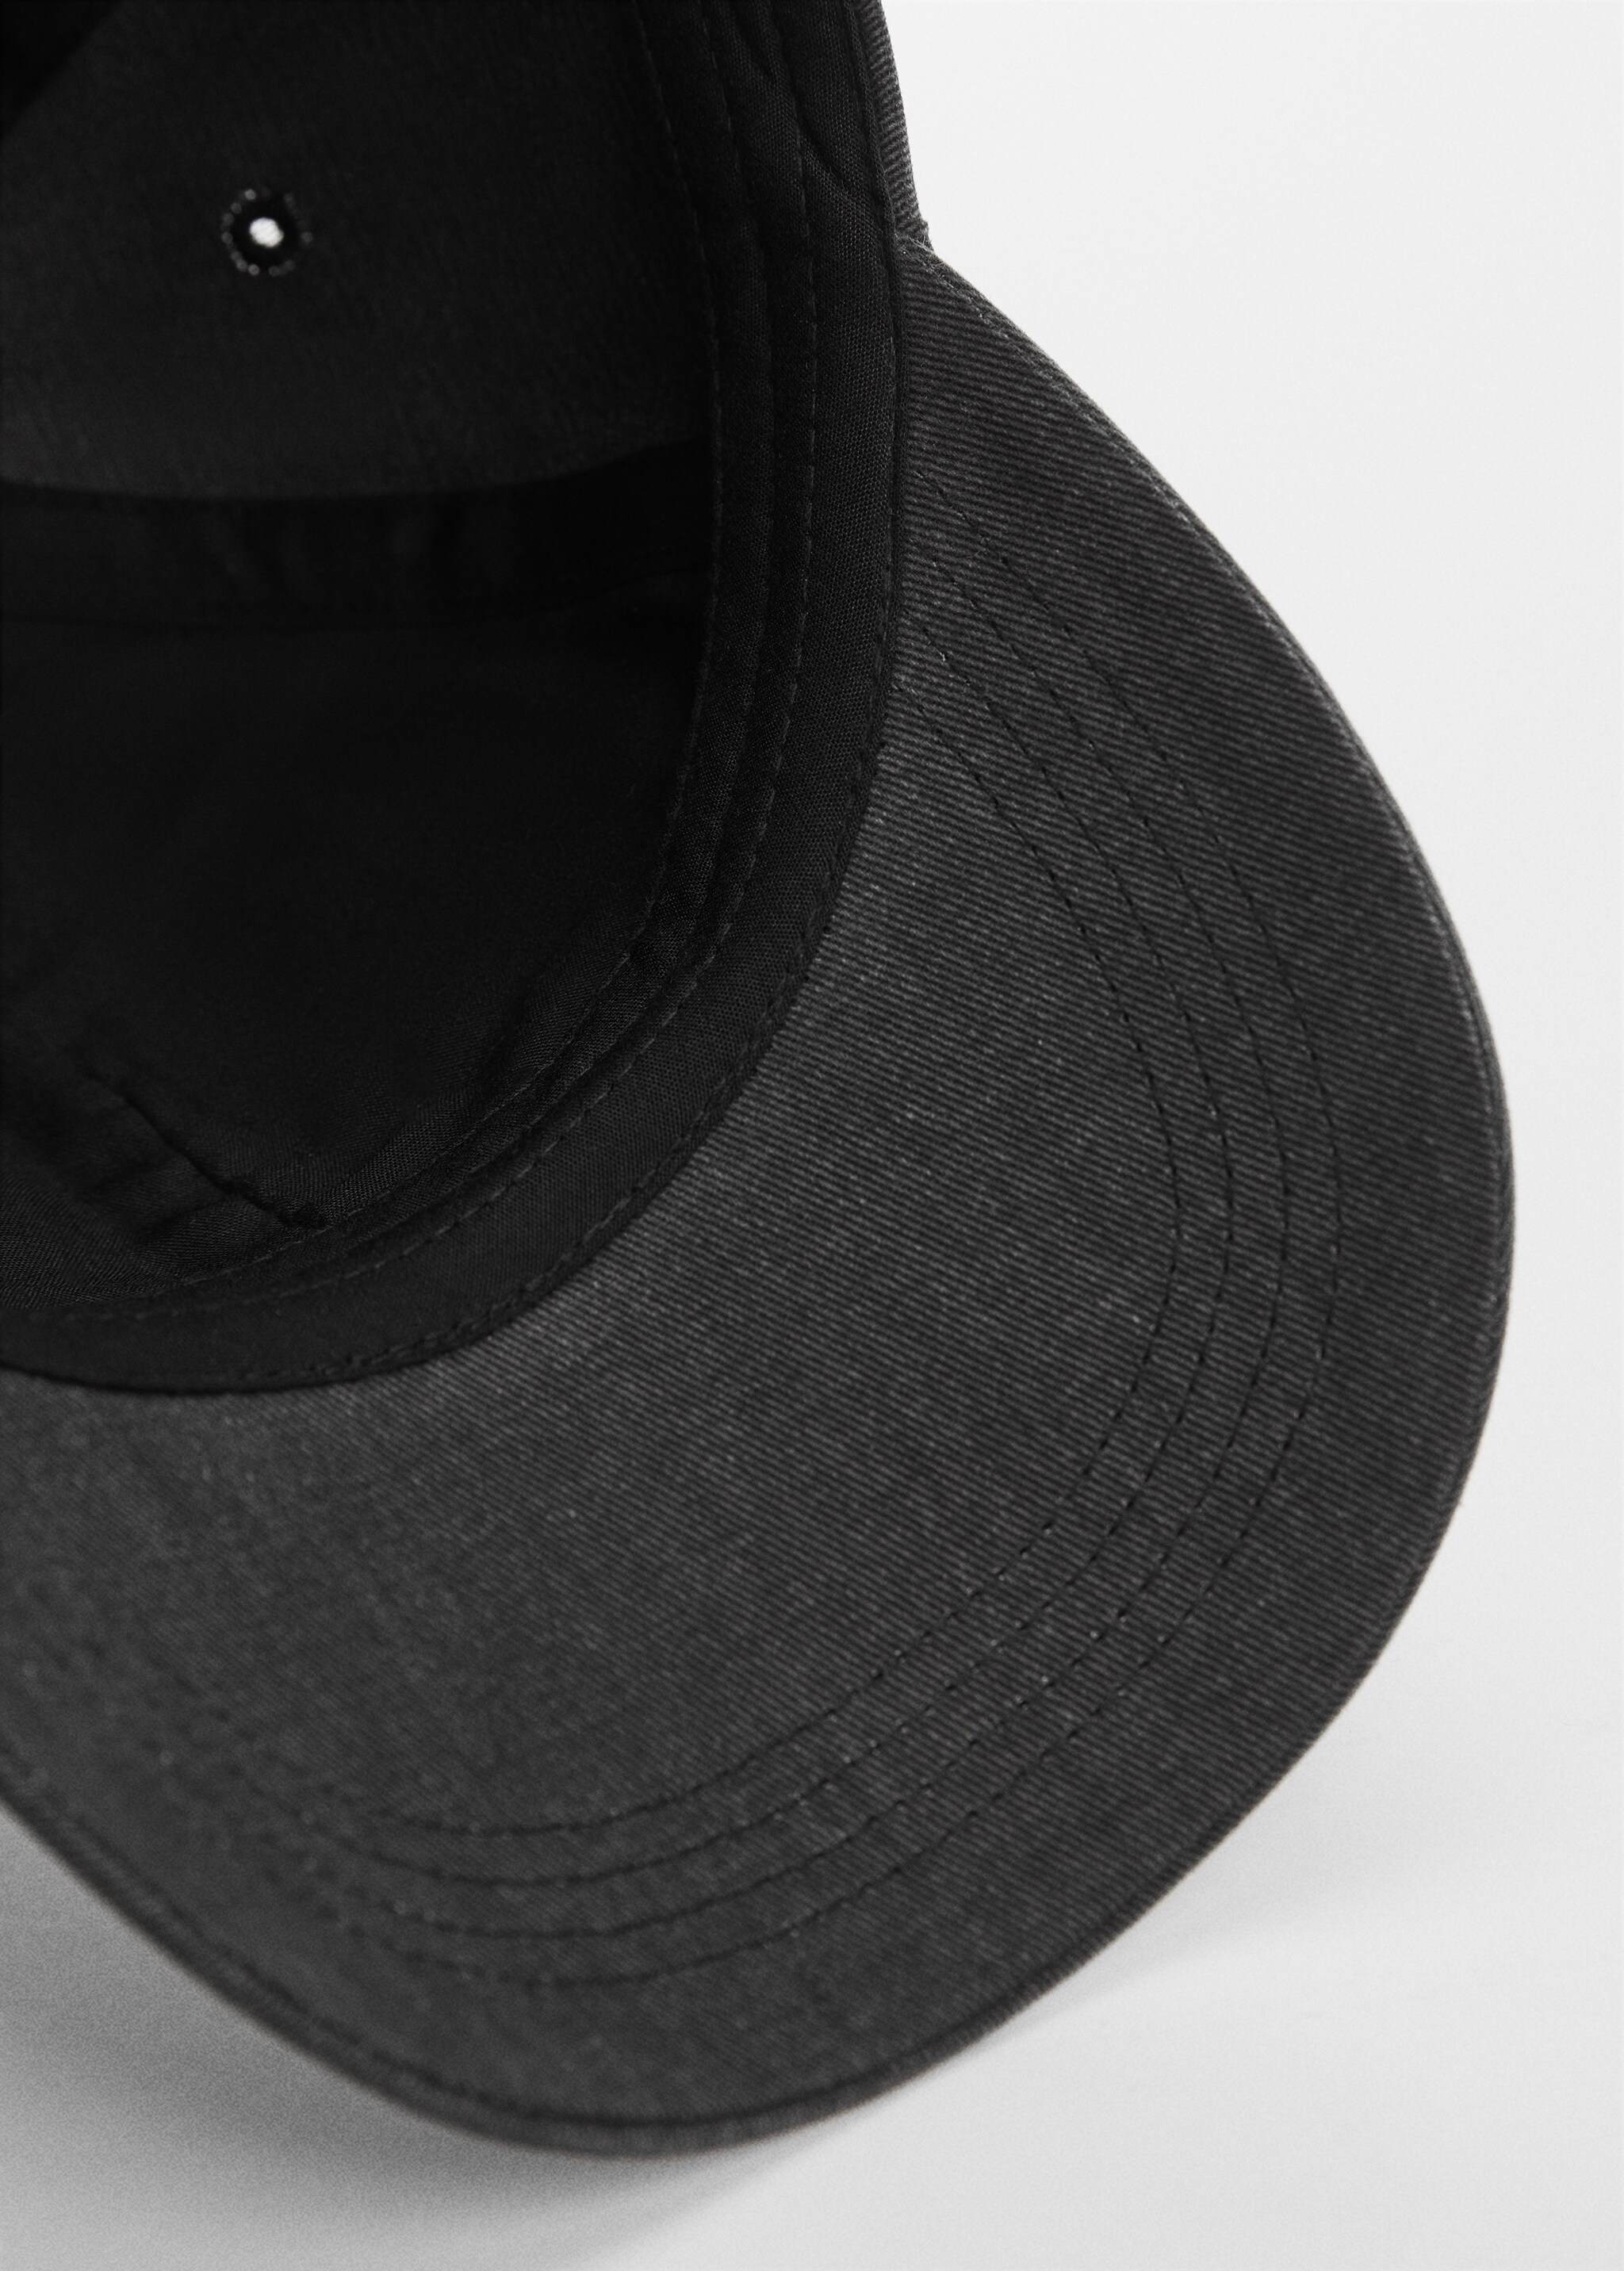 Denim cap with message - Details of the article 2